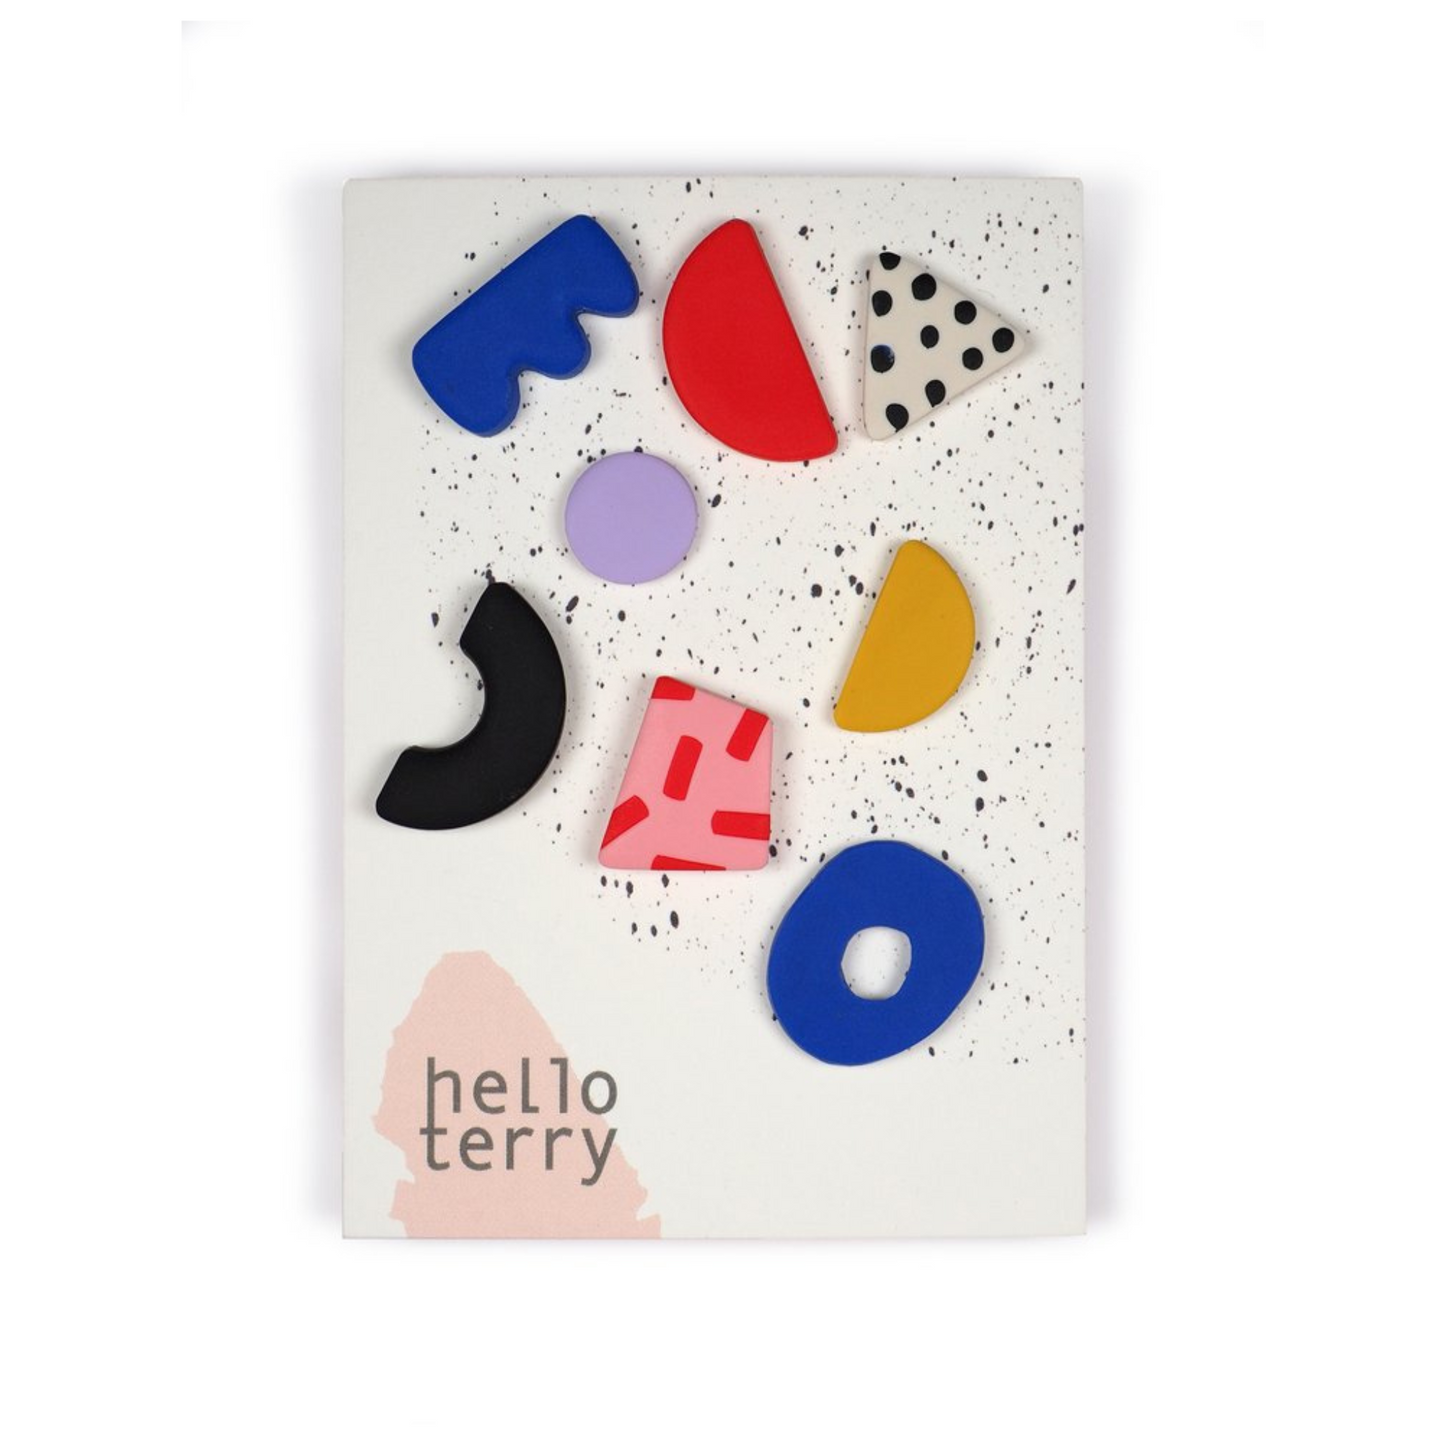 Multi-shaped and coloured mis-matched earrings by Hello Terry attached to a flat card.